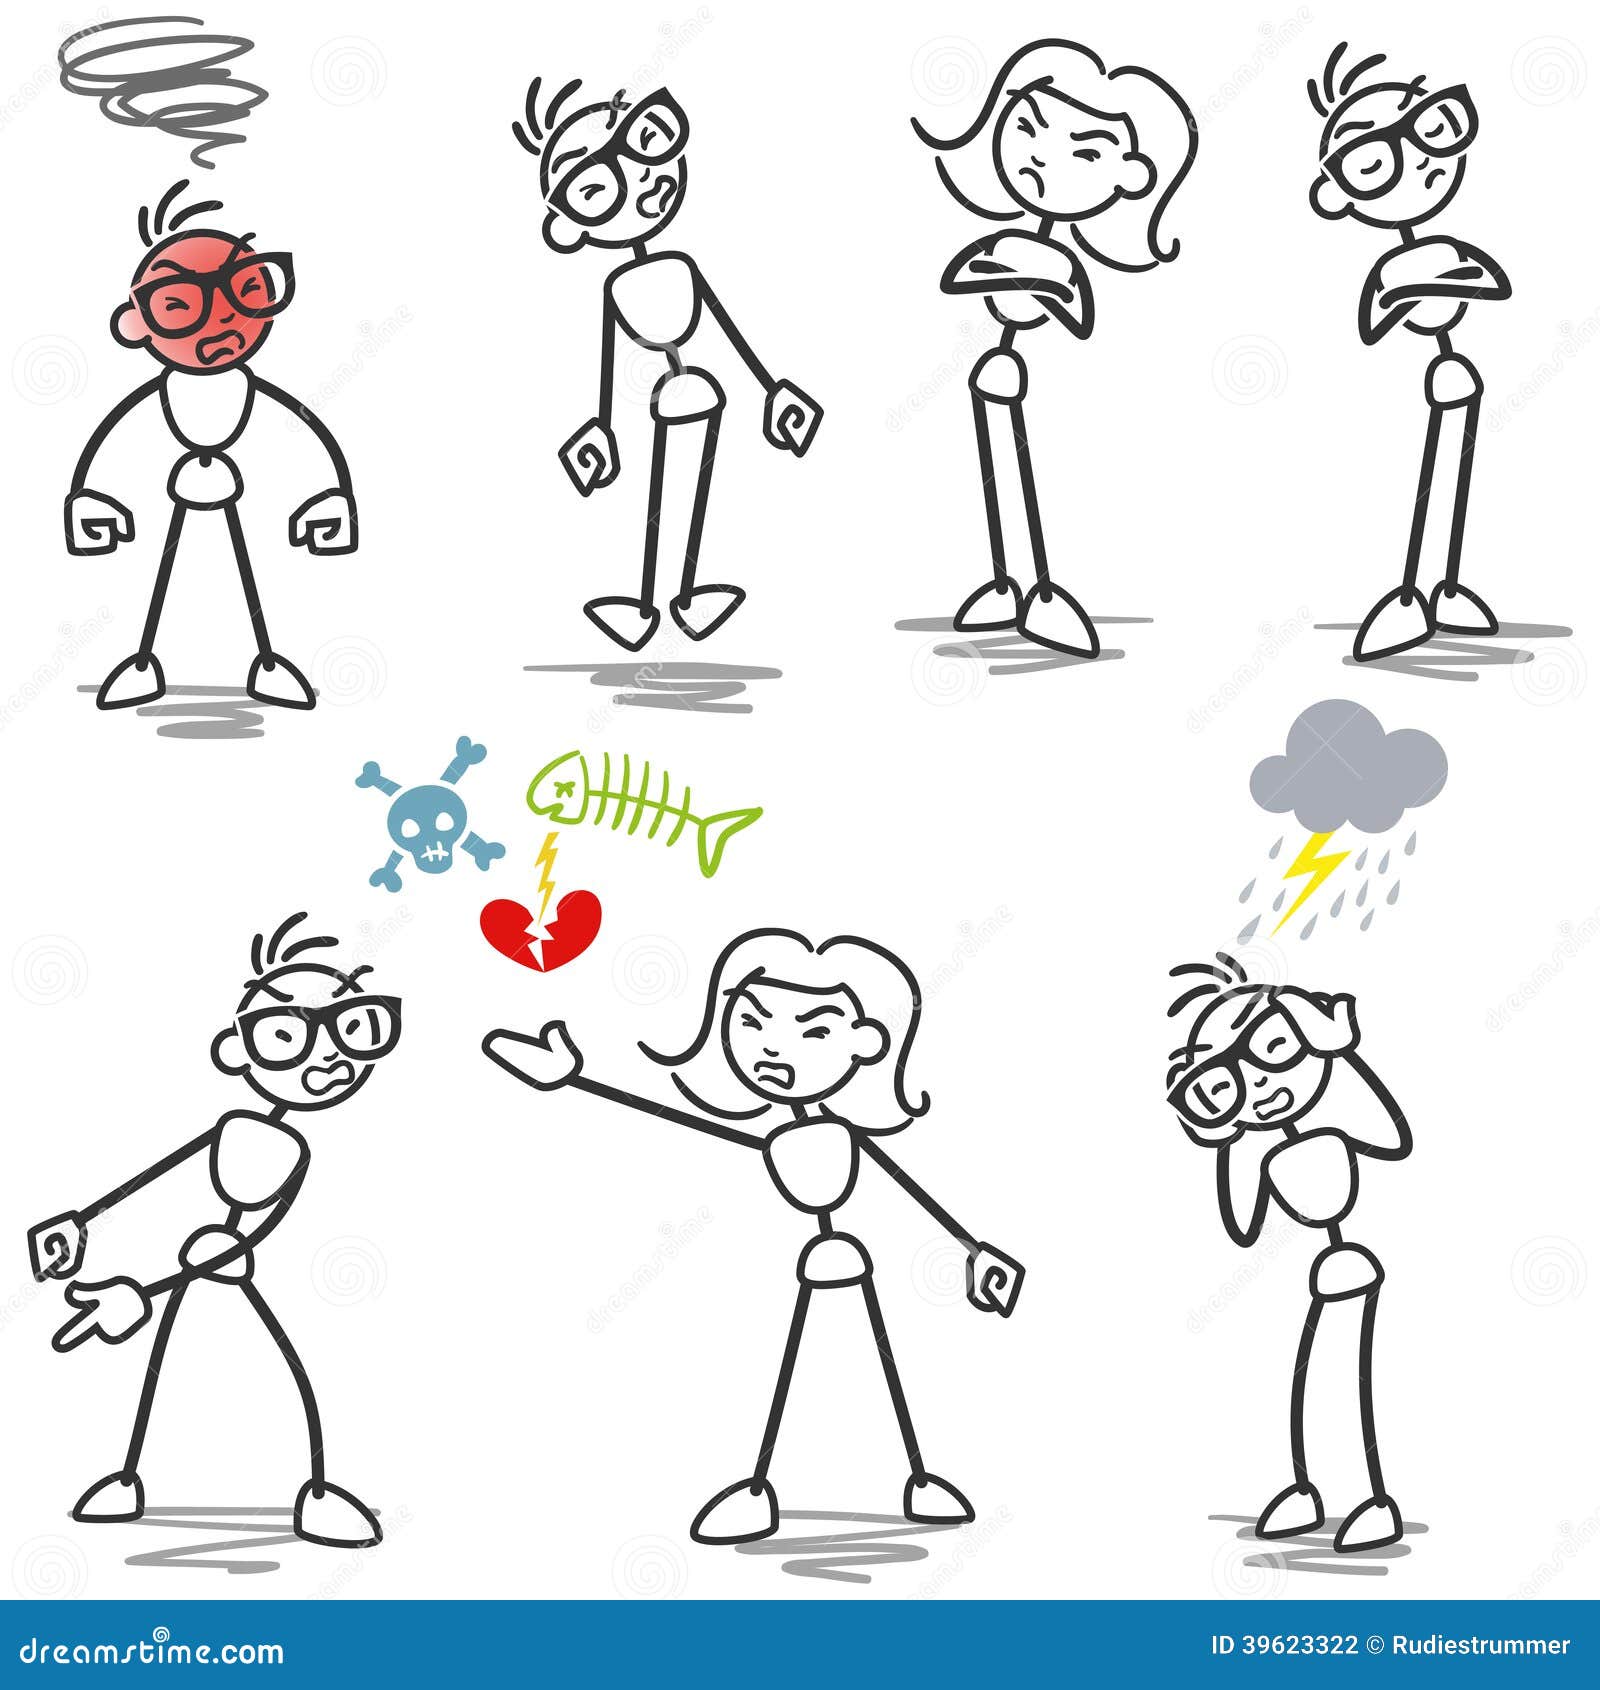 Angry Stick Figure Stock Illustrations – 1,209 Angry Stick Figure Stock  Illustrations, Vectors & Clipart - Dreamstime